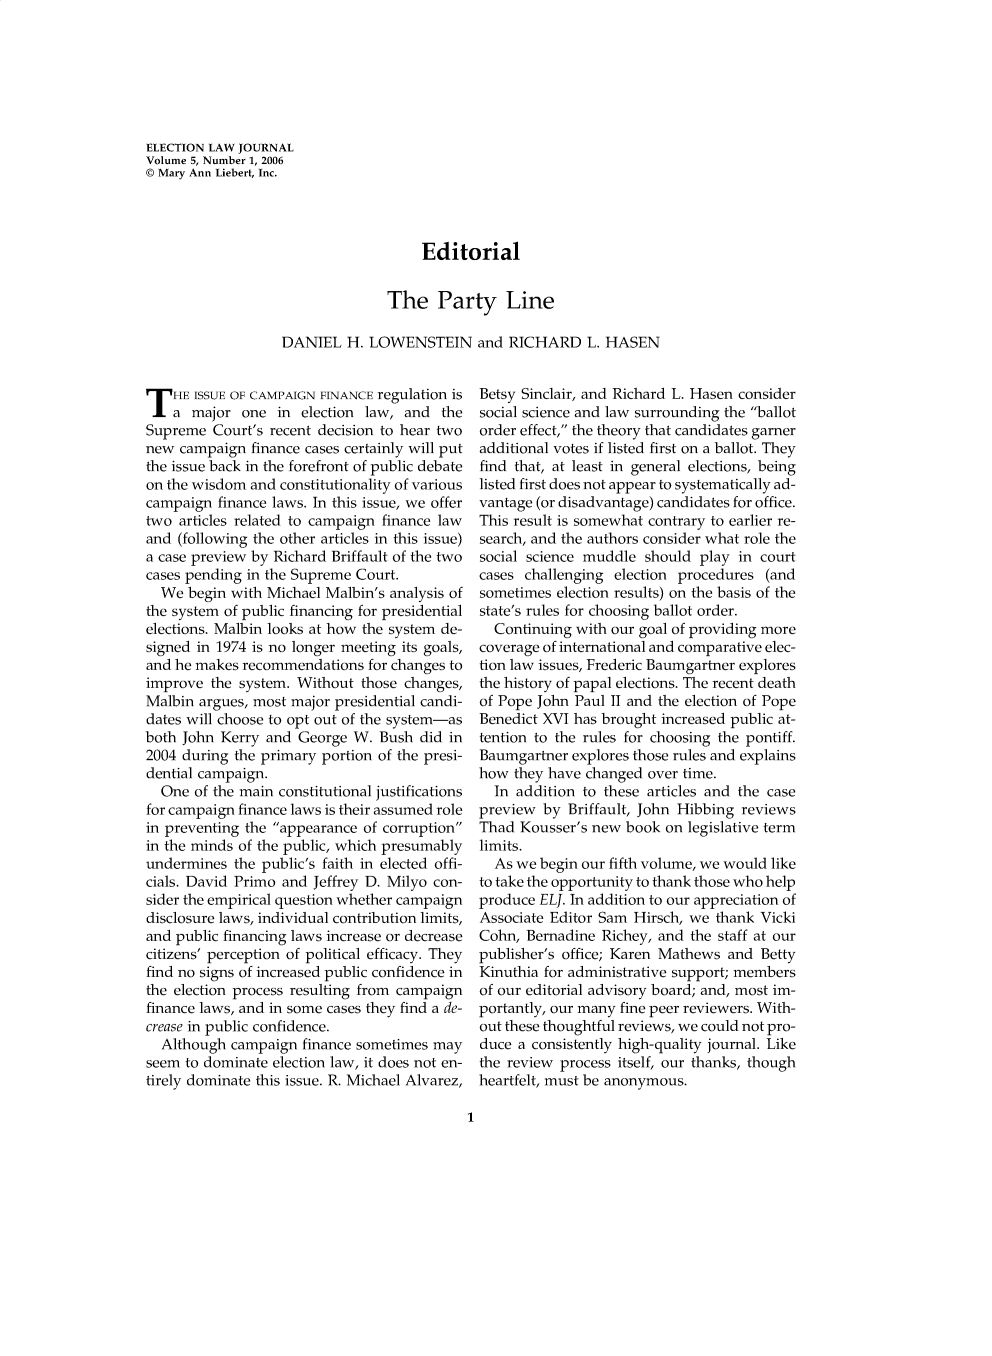 handle is hein.journals/enlwjr5 and id is 1 raw text is: ELECTION LAW JOURNAL
Volume 5, Number 1, 2006
© Mary Ann Liebert, Inc.
Editorial
The Party Line
DANIEL H. LOWENSTEIN and RICHARD L. HASEN

T HE ISSUE OF CAMPAIGN FINANCE regulation is
a major one in election law, and the
Supreme Court's recent decision to hear two
new campaign finance cases certainly will put
the issue back in the forefront of public debate
on the wisdom and constitutionality of various
campaign finance laws. In this issue, we offer
two articles related to campaign finance law
and (following the other articles in this issue)
a case preview by Richard Briffault of the two
cases pending in the Supreme Court.
We begin with Michael Malbin's analysis of
the system of public financing for presidential
elections. Malbin looks at how the system de-
signed in 1974 is no longer meeting its goals,
and he makes recommendations for changes to
improve the system. Without those changes,
Malbin argues, most major presidential candi-
dates will choose to opt out of the system-as
both John Kerry and George W. Bush did in
2004 during the primary portion of the presi-
dential campaign.
One of the main constitutional justifications
for campaign finance laws is their assumed role
in preventing the appearance of corruption
in the minds of the public, which presumably
undermines the public's faith in elected offi-
cials. David Primo and Jeffrey D. Milyo con-
sider the empirical question whether campaign
disclosure laws, individual contribution limits,
and public financing laws increase or decrease
citizens' perception of political efficacy. They
find no signs of increased public confidence in
the election process resulting from campaign
finance laws, and in some cases they find a de-
crease in public confidence.
Although campaign finance sometimes may
seem to dominate election law, it does not en-
tirely dominate this issue. R. Michael Alvarez,

Betsy Sinclair, and Richard L. Hasen consider
social science and law surrounding the ballot
order effect, the theory that candidates garner
additional votes if listed first on a ballot. They
find that, at least in general elections, being
listed first does not appear to systematically ad-
vantage (or disadvantage) candidates for office.
This result is somewhat contrary to earlier re-
search, and the authors consider what role the
social science muddle should play in court
cases challenging election procedures (and
sometimes election results) on the basis of the
state's rules for choosing ballot order.
Continuing with our goal of providing more
coverage of international and comparative elec-
tion law issues, Frederic Baumgartner explores
the history of papal elections. The recent death
of Pope John Paul II and the election of Pope
Benedict XVI has brought increased public at-
tention to the rules for choosing the pontiff.
Baumgartner explores those rules and explains
how they have changed over time.
In addition to these articles and the case
preview by Briffault, John Hibbing reviews
Thad Kousser's new book on legislative term
limits.
As we begin our fifth volume, we would like
to take the opportunity to thank those who help
produce ELJ. In addition to our appreciation of
Associate Editor Sam Hirsch, we thank Vicki
Cohn, Bernadine Richey, and the staff at our
publisher's office; Karen Mathews and Betty
Kinuthia for administrative support; members
of our editorial advisory board; and, most im-
portantly, our many fine peer reviewers. With-
out these thoughtful reviews, we could not pro-
duce a consistently high-quality journal. Like
the review process itself, our thanks, though
heartfelt, must be anonymous.

1


